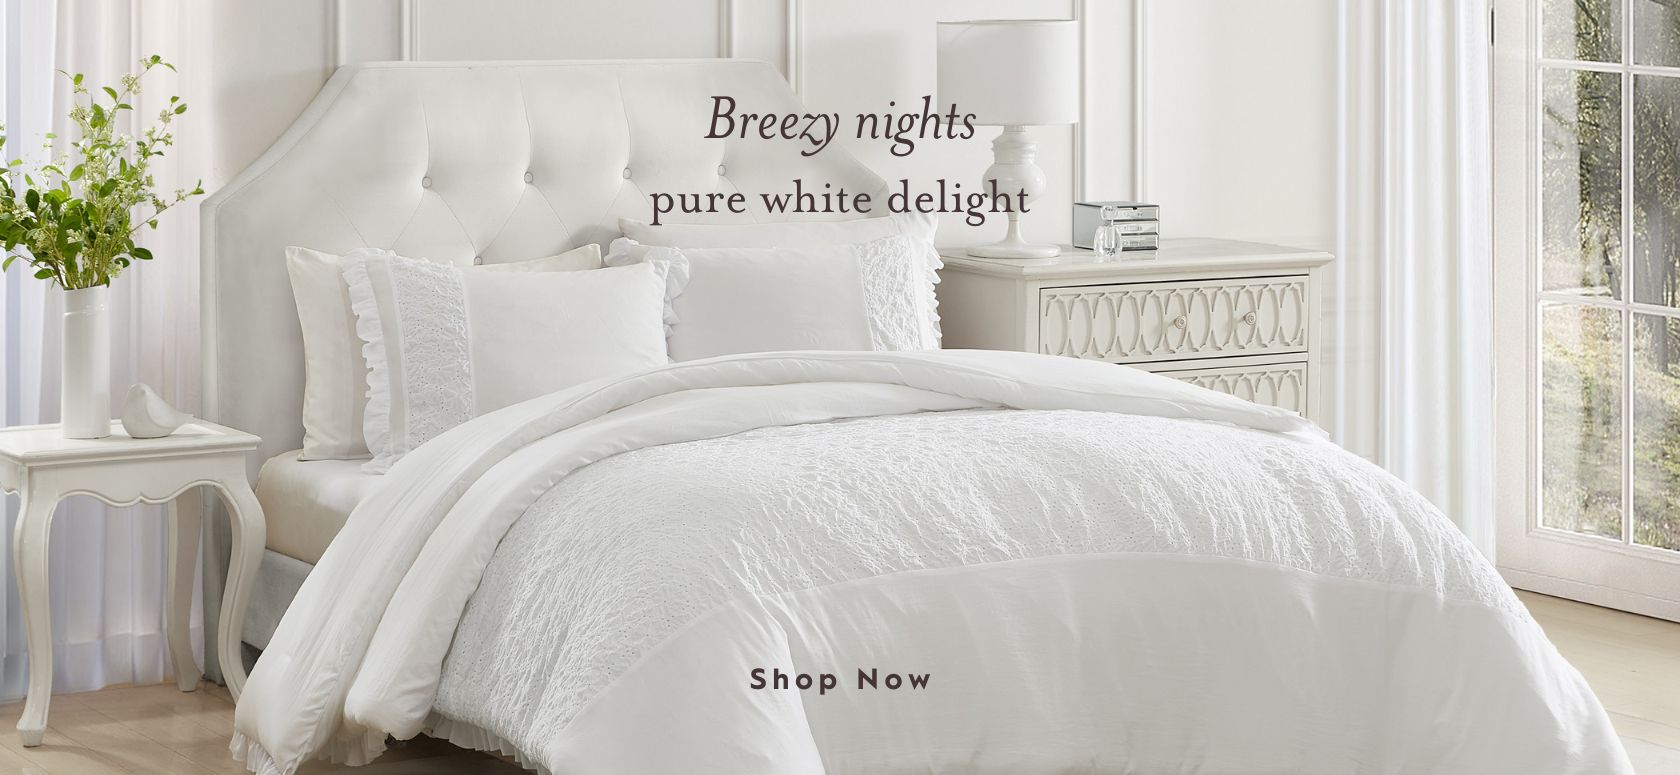 Eyelet Ruffle Microfiber White Comforter Set on a bed in a bedroom.